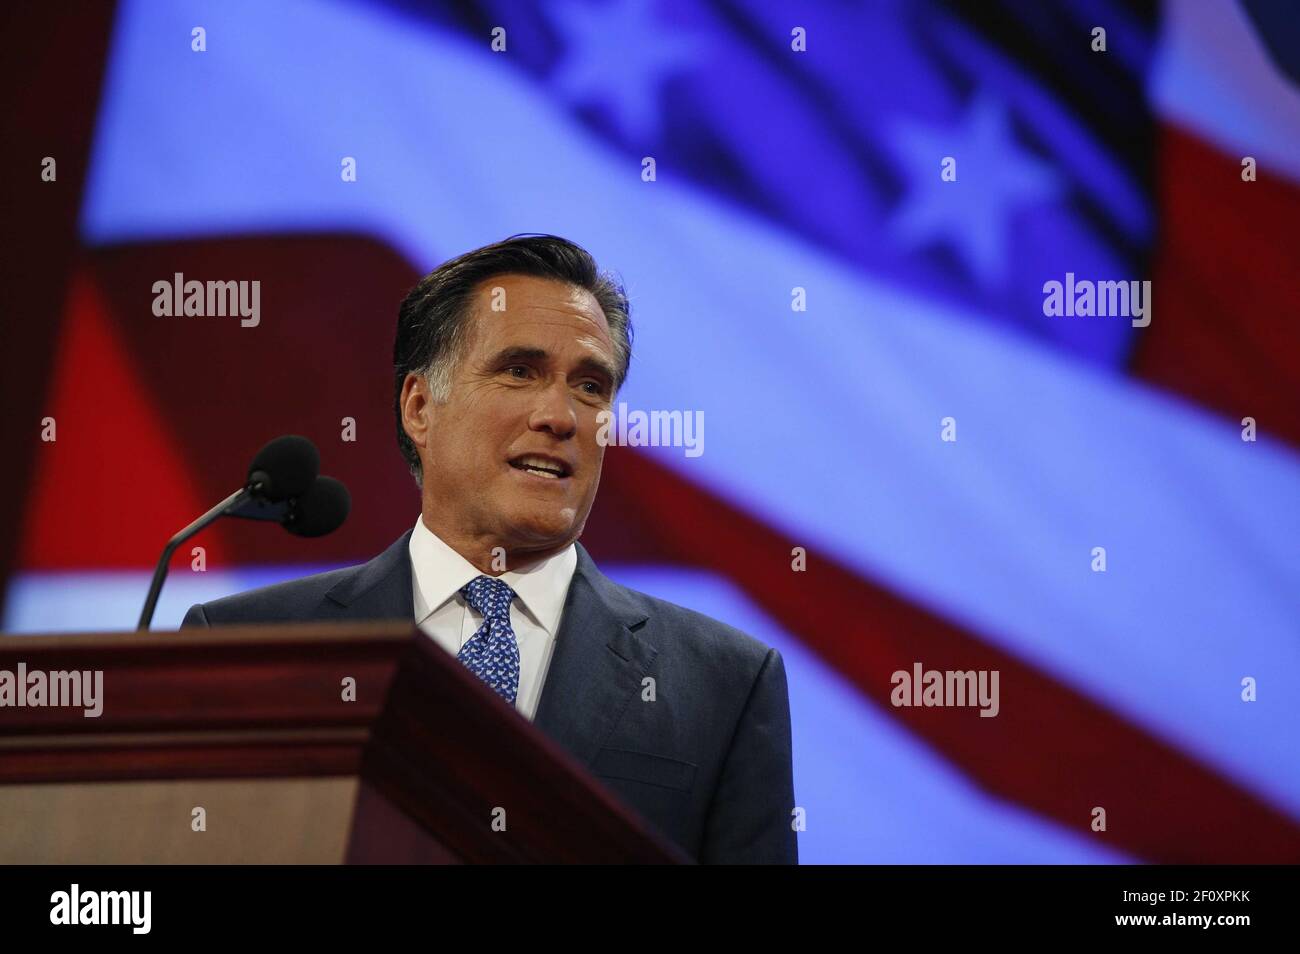 3 September 2008 - St. Paul, MN - Former Governor of Massachusetts Mitt Romney gave a speech at the Republican National Convention where he endorsed John McCain for president. Mr Romney was also a candidate for the nomination as well but dropped out. Photo Credit: Gary Fabiano/Sipa Press/0809040737 Stock Photo